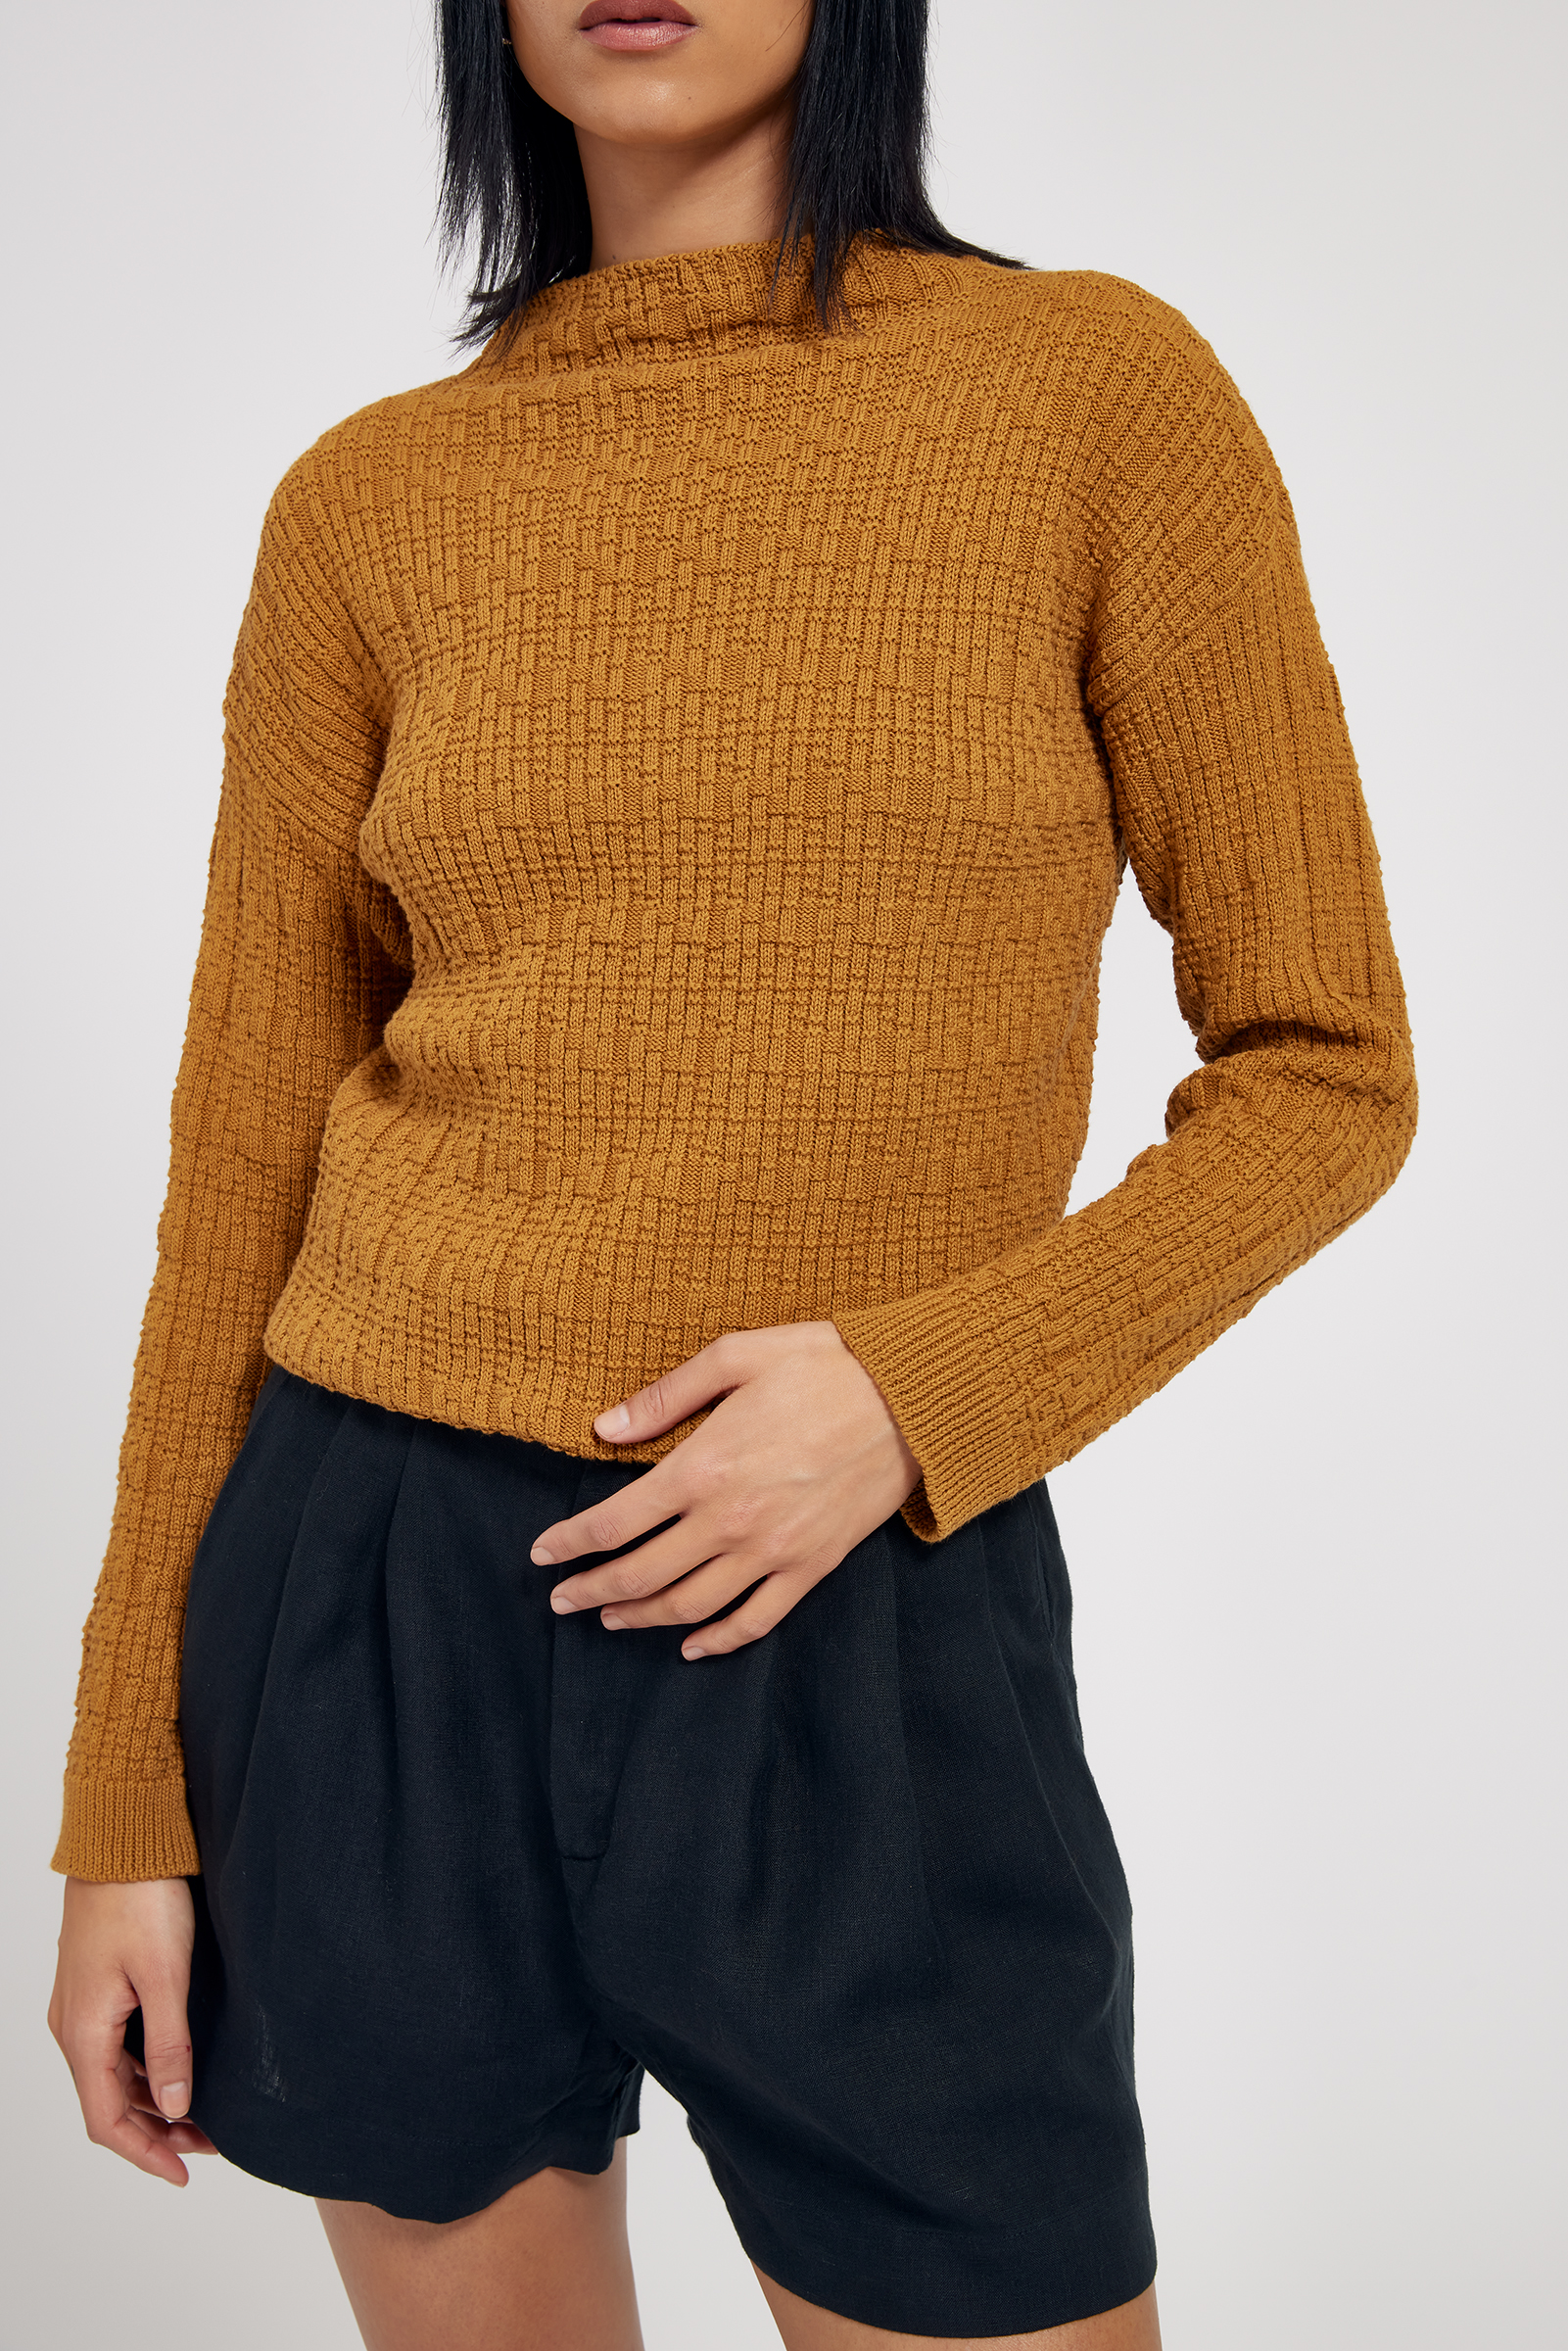 Structured knit sweater